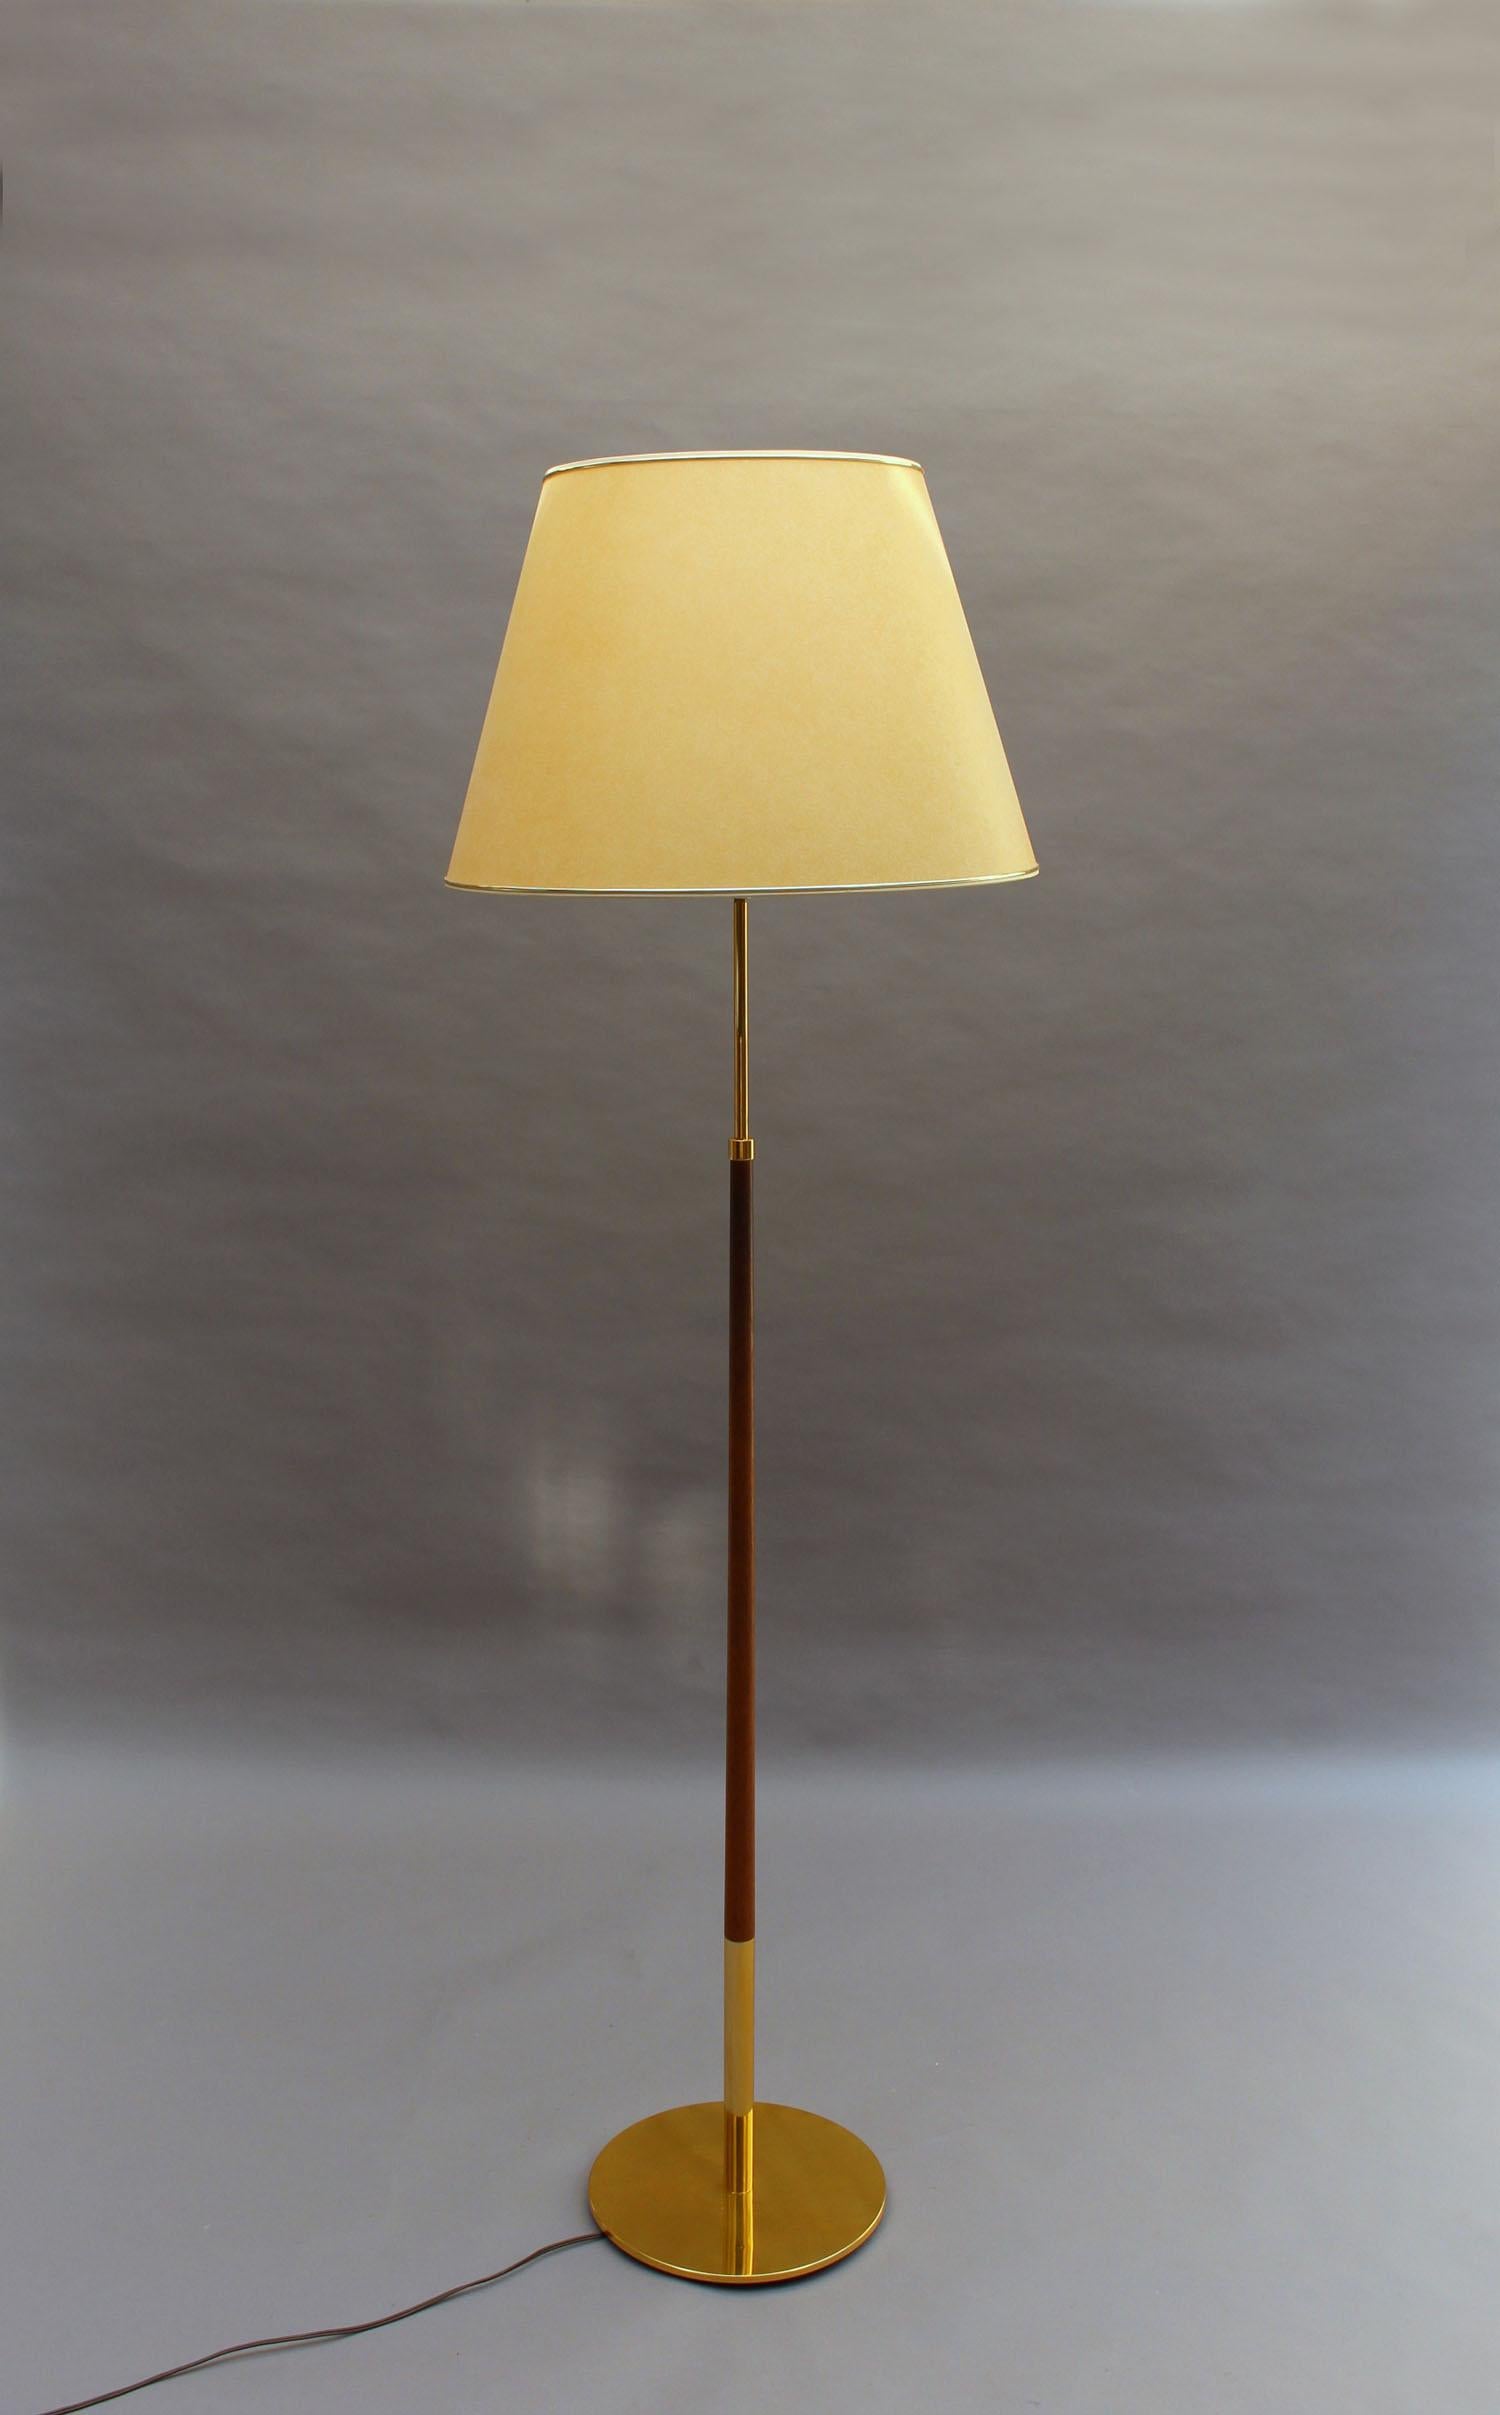 Th. Valentiner- A fine mid-century floor lamp with a brass base, and a brass and wooden rod that supports a conical shade.